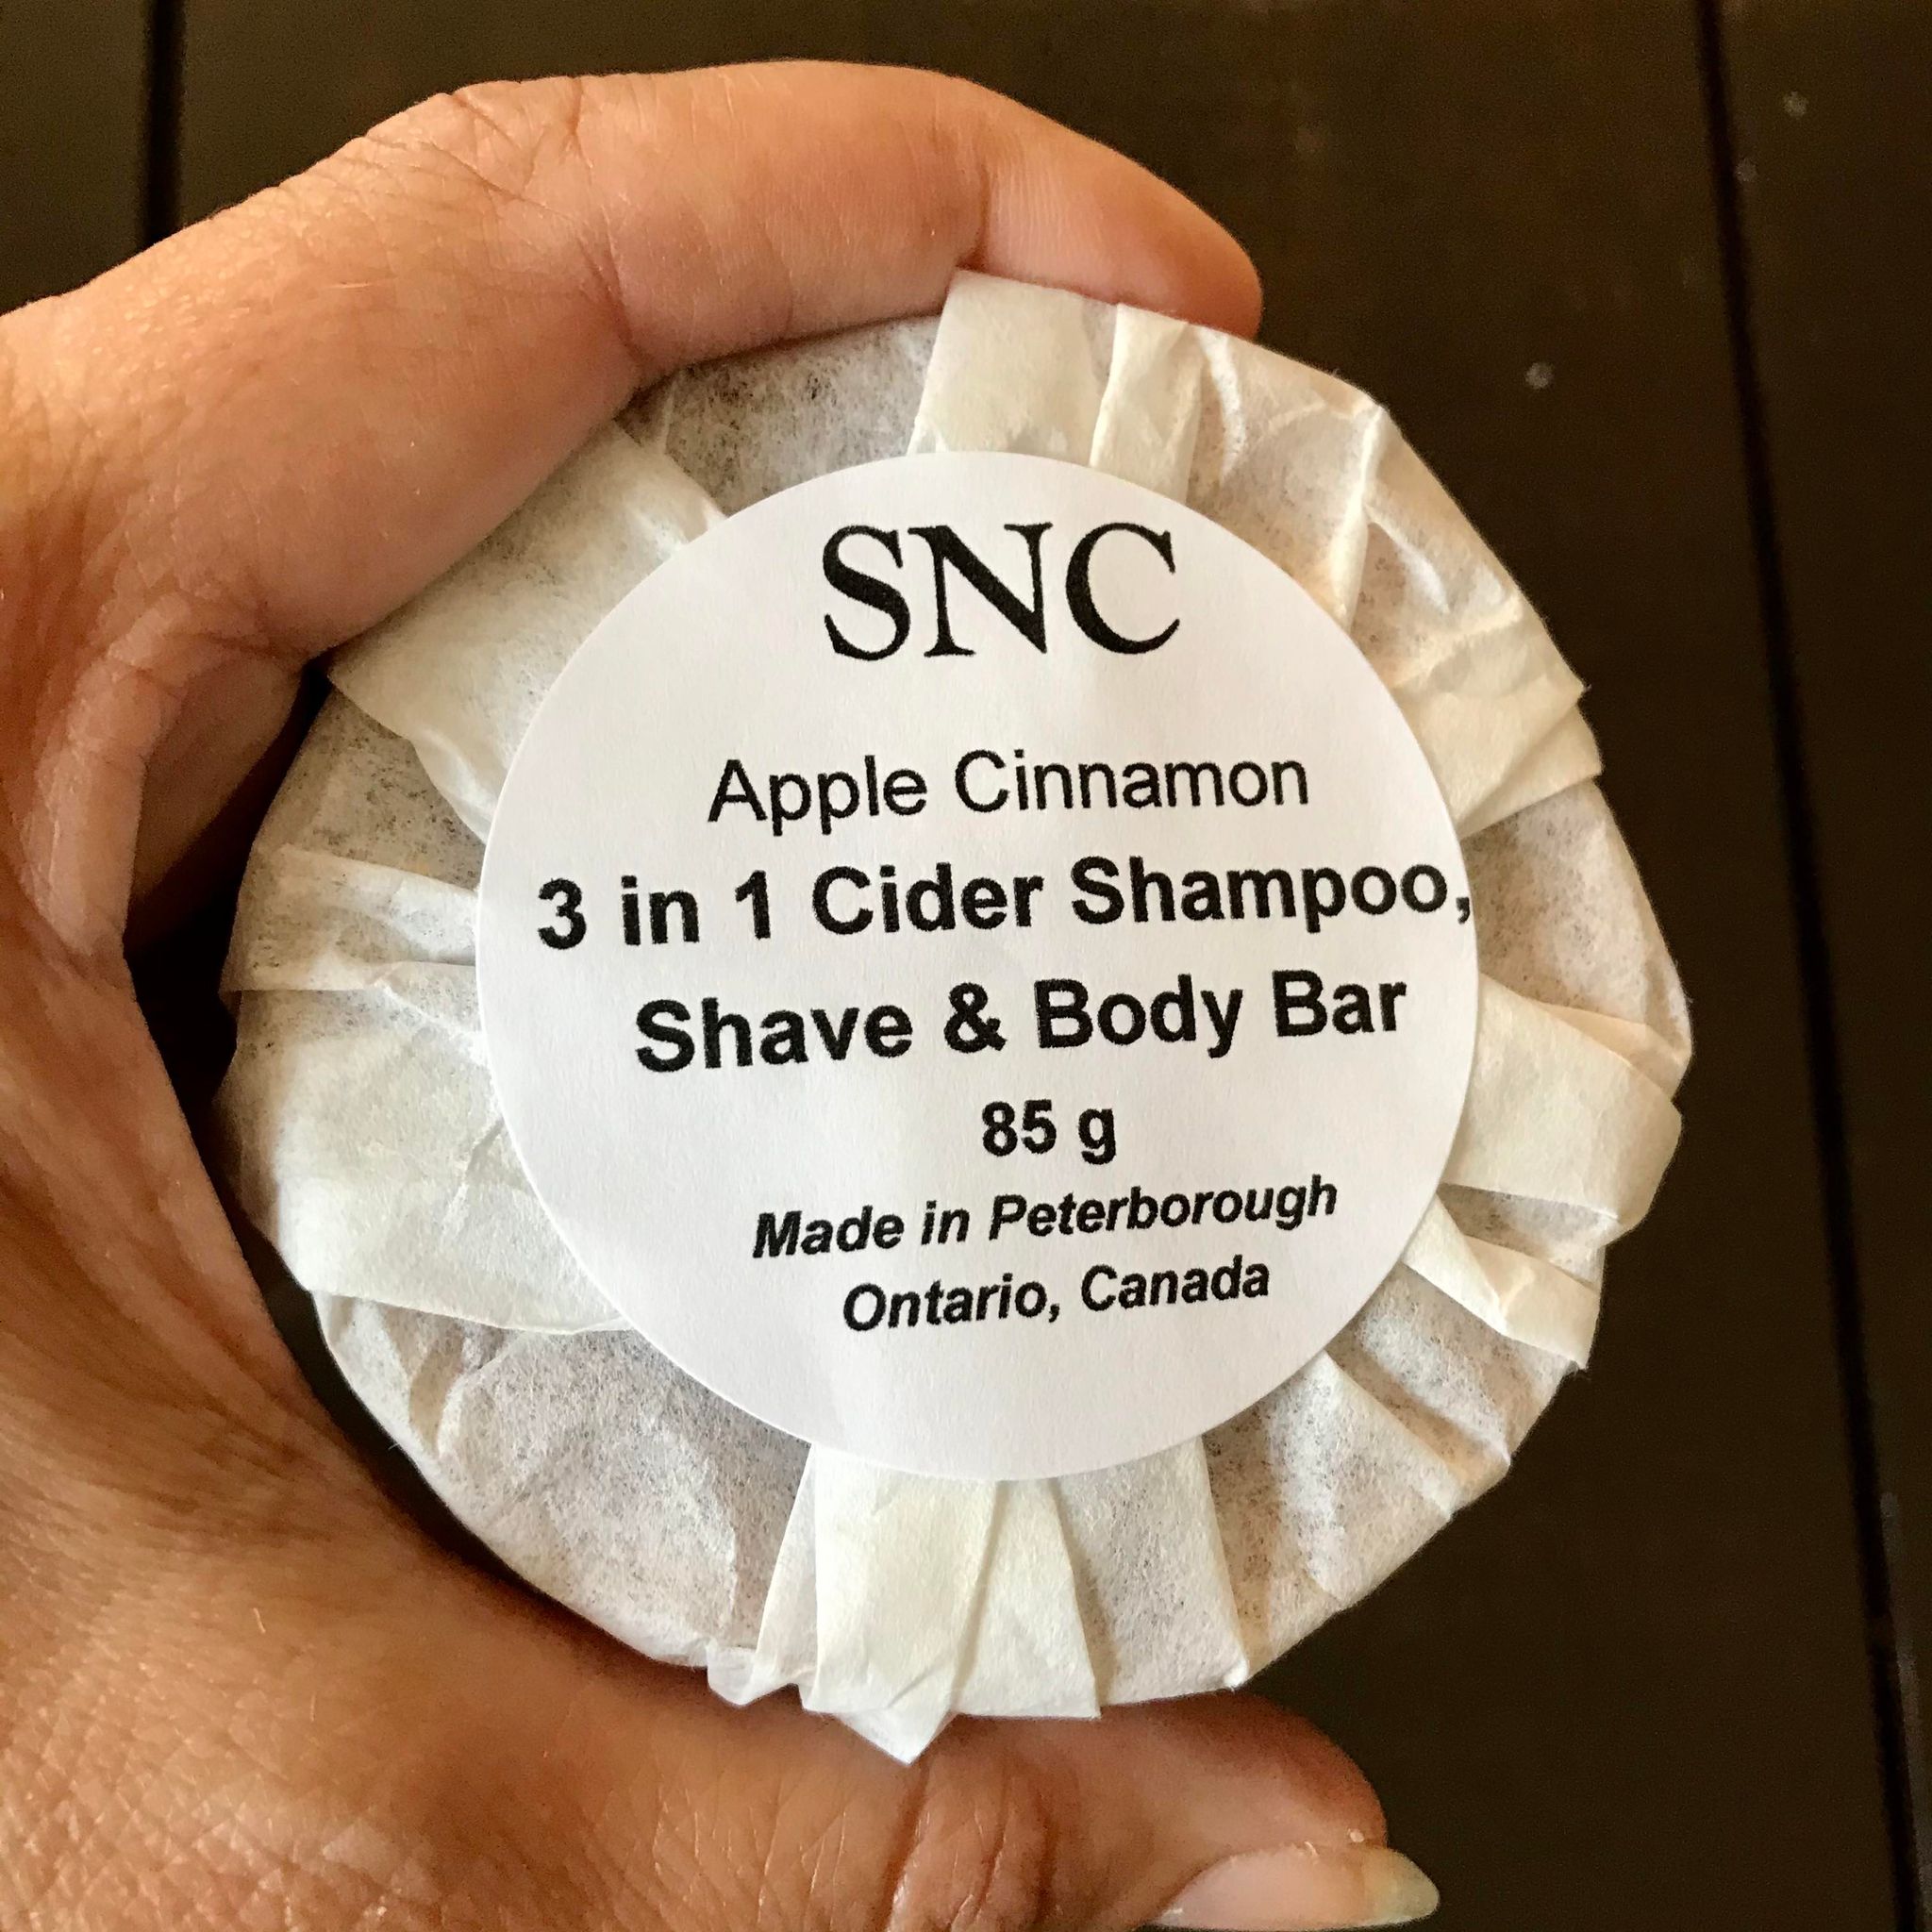 SNC apple cinnamon vegan shampoo, shave and body bar is handcrafted in Canada in small batches and is enhanced with craft apple cider (Kawartha Country Wines) and organic apple cider vinegar making it especially ideal for anyone who tends have oily hair.